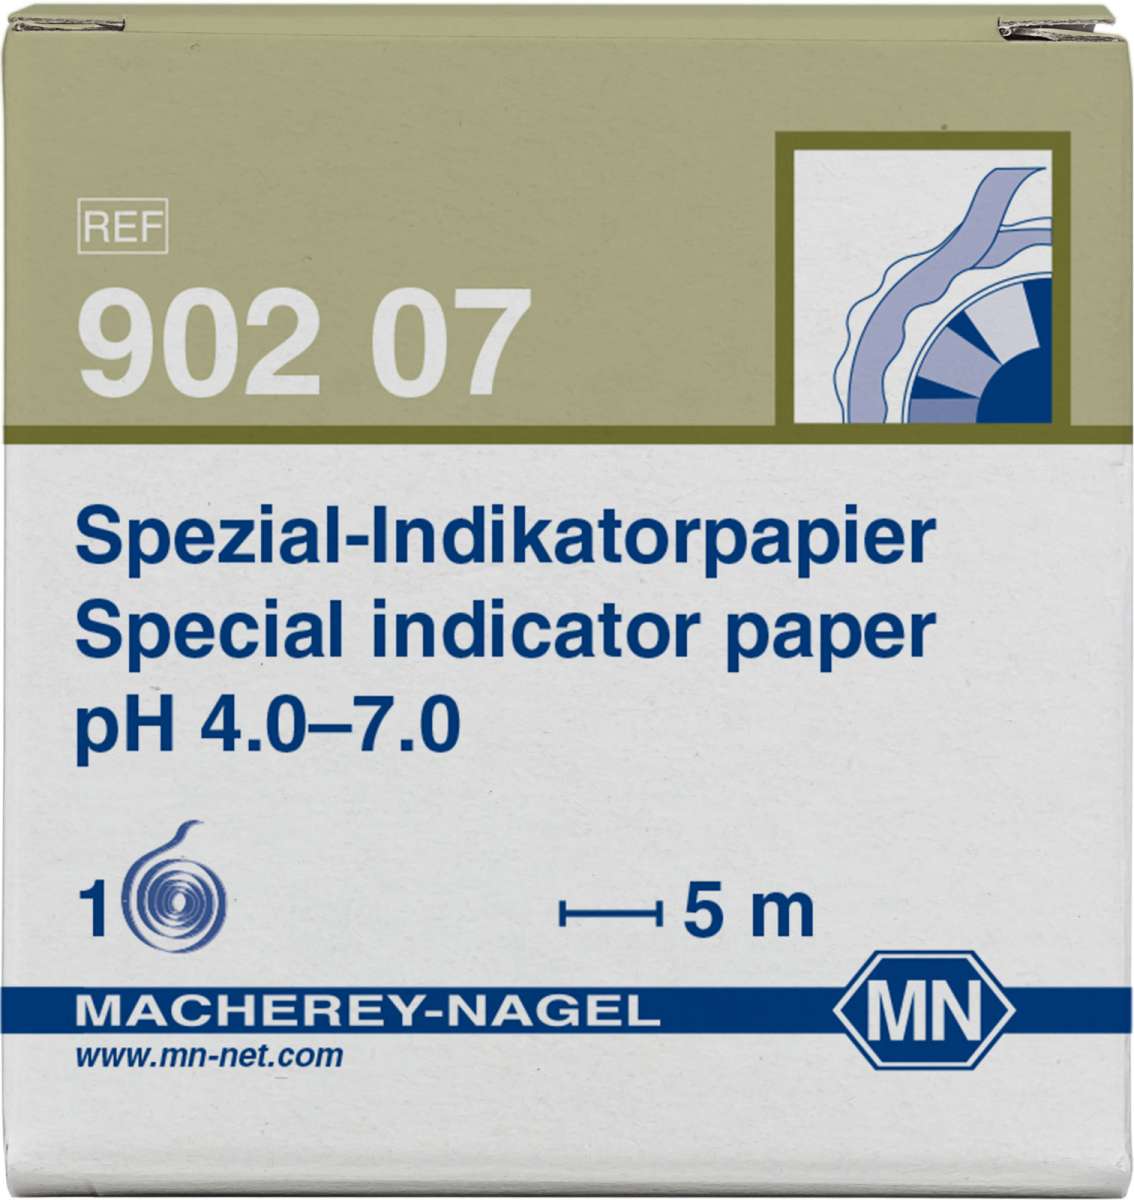 Refill pack for Special indicator paper pH 4.0 to 7.0 (3 reels of 5m length and 7mm width)